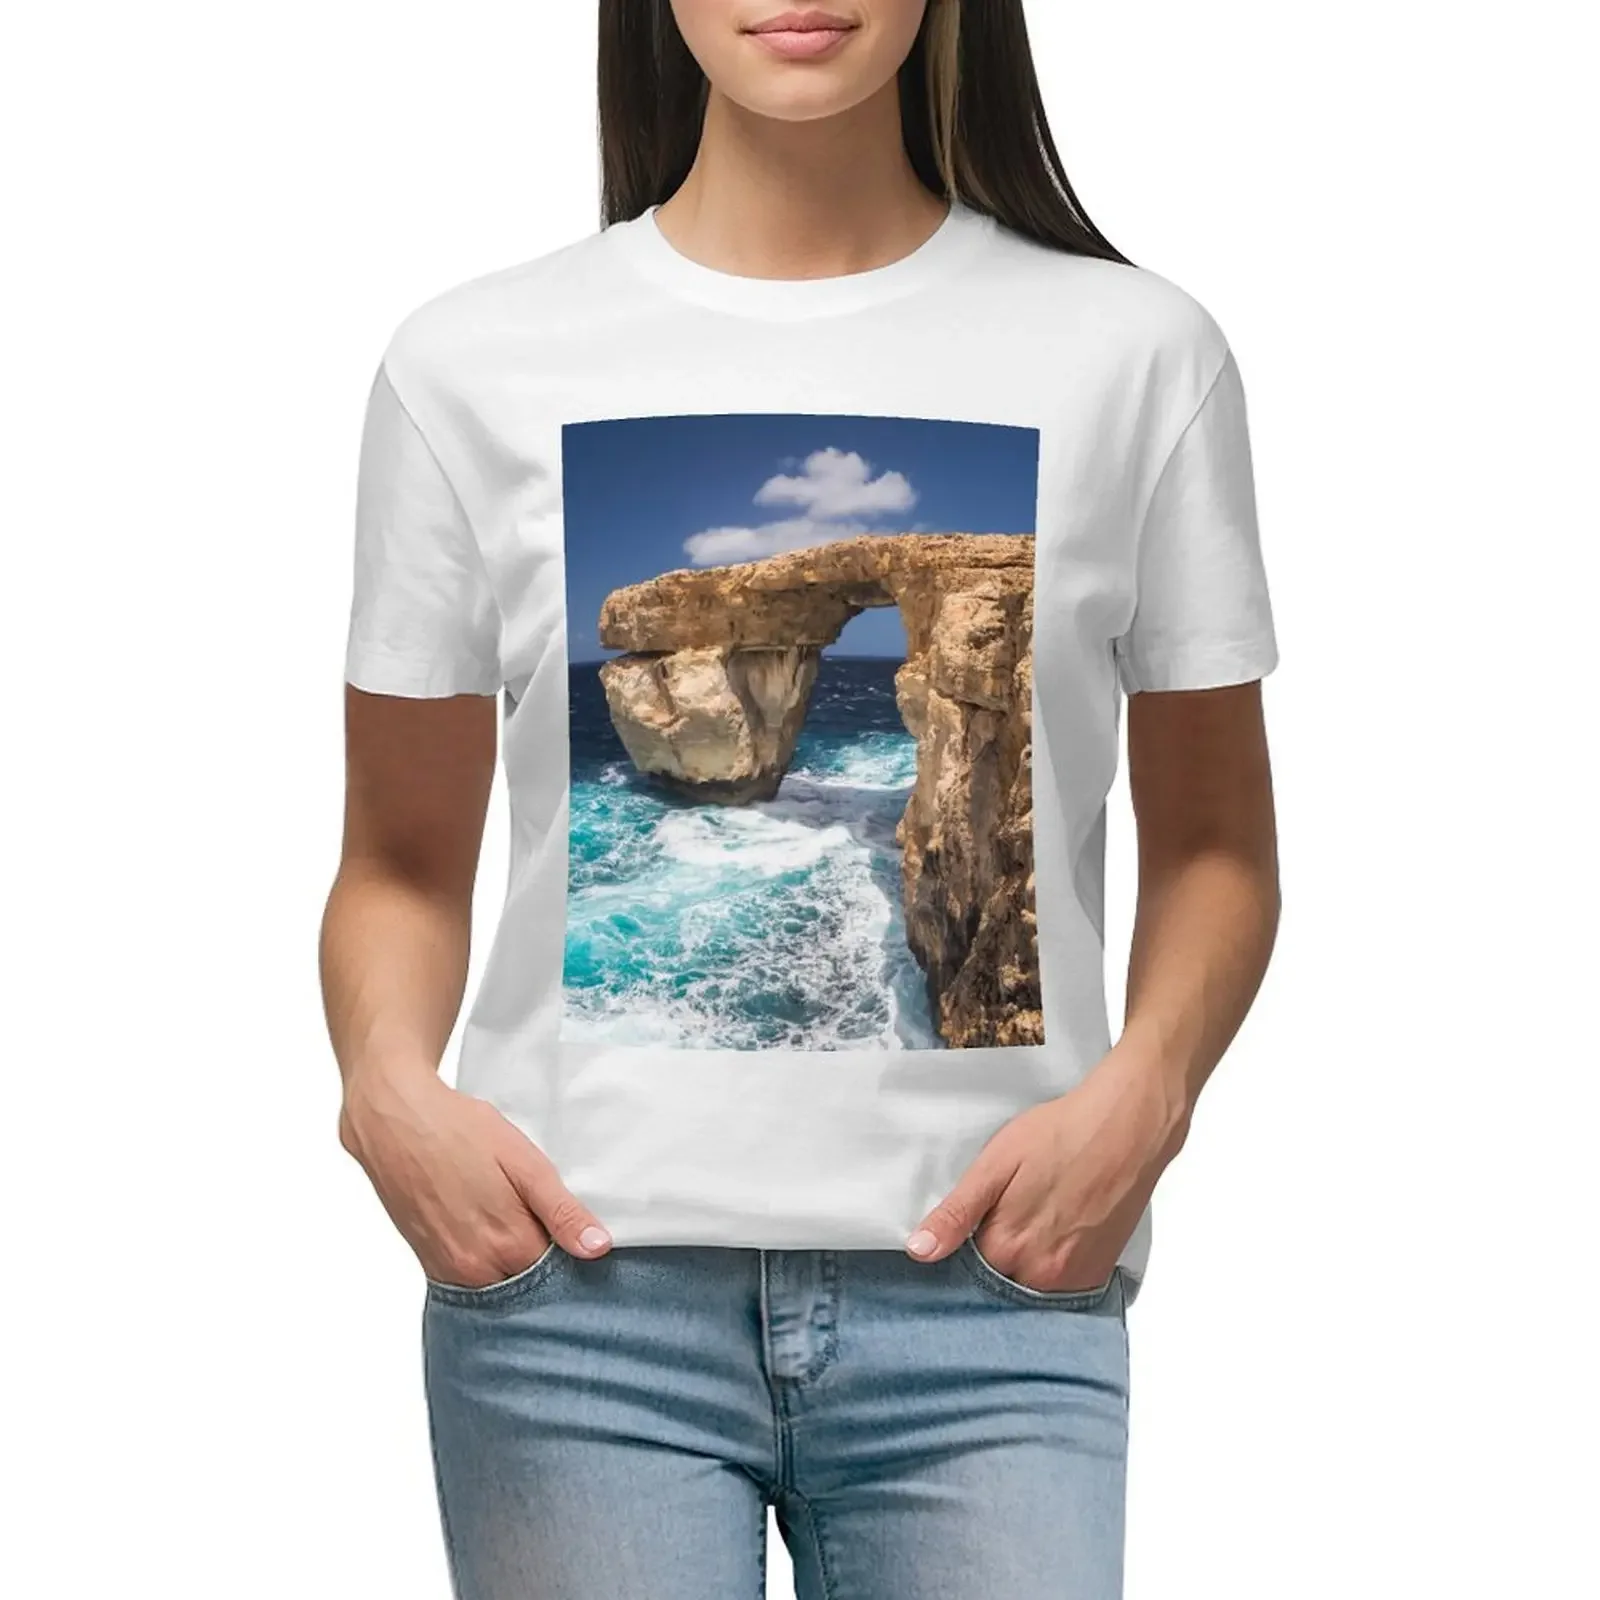 

Azure window T-shirt summer tops funny hippie clothes tshirts for Women